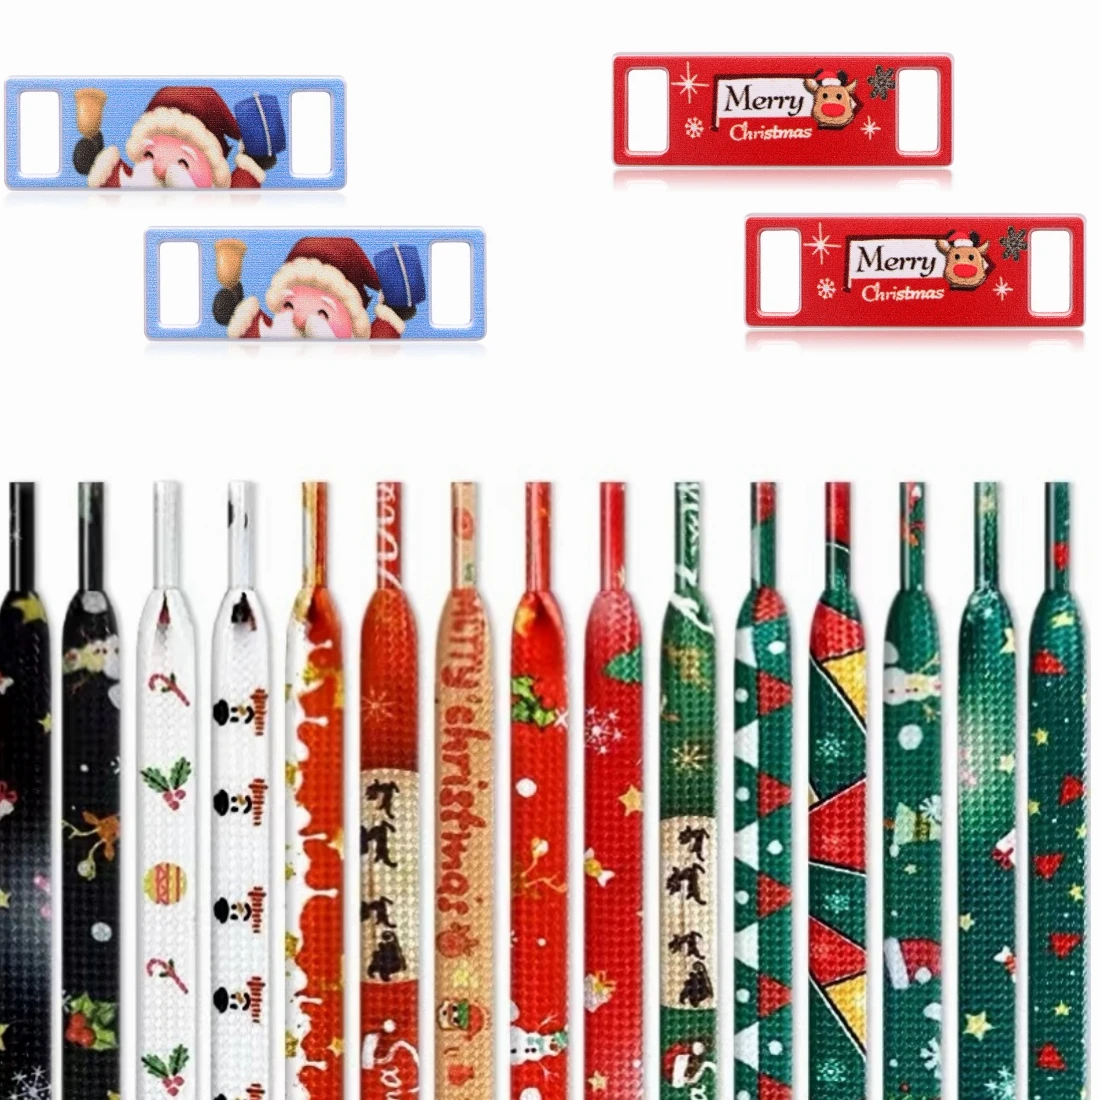 

New Assemble Christmas Flat Laces Shoelaces Shoe Buckle Santa Claus Lucky New Year Snowman Elk Green Pine Creative Winter Gifts